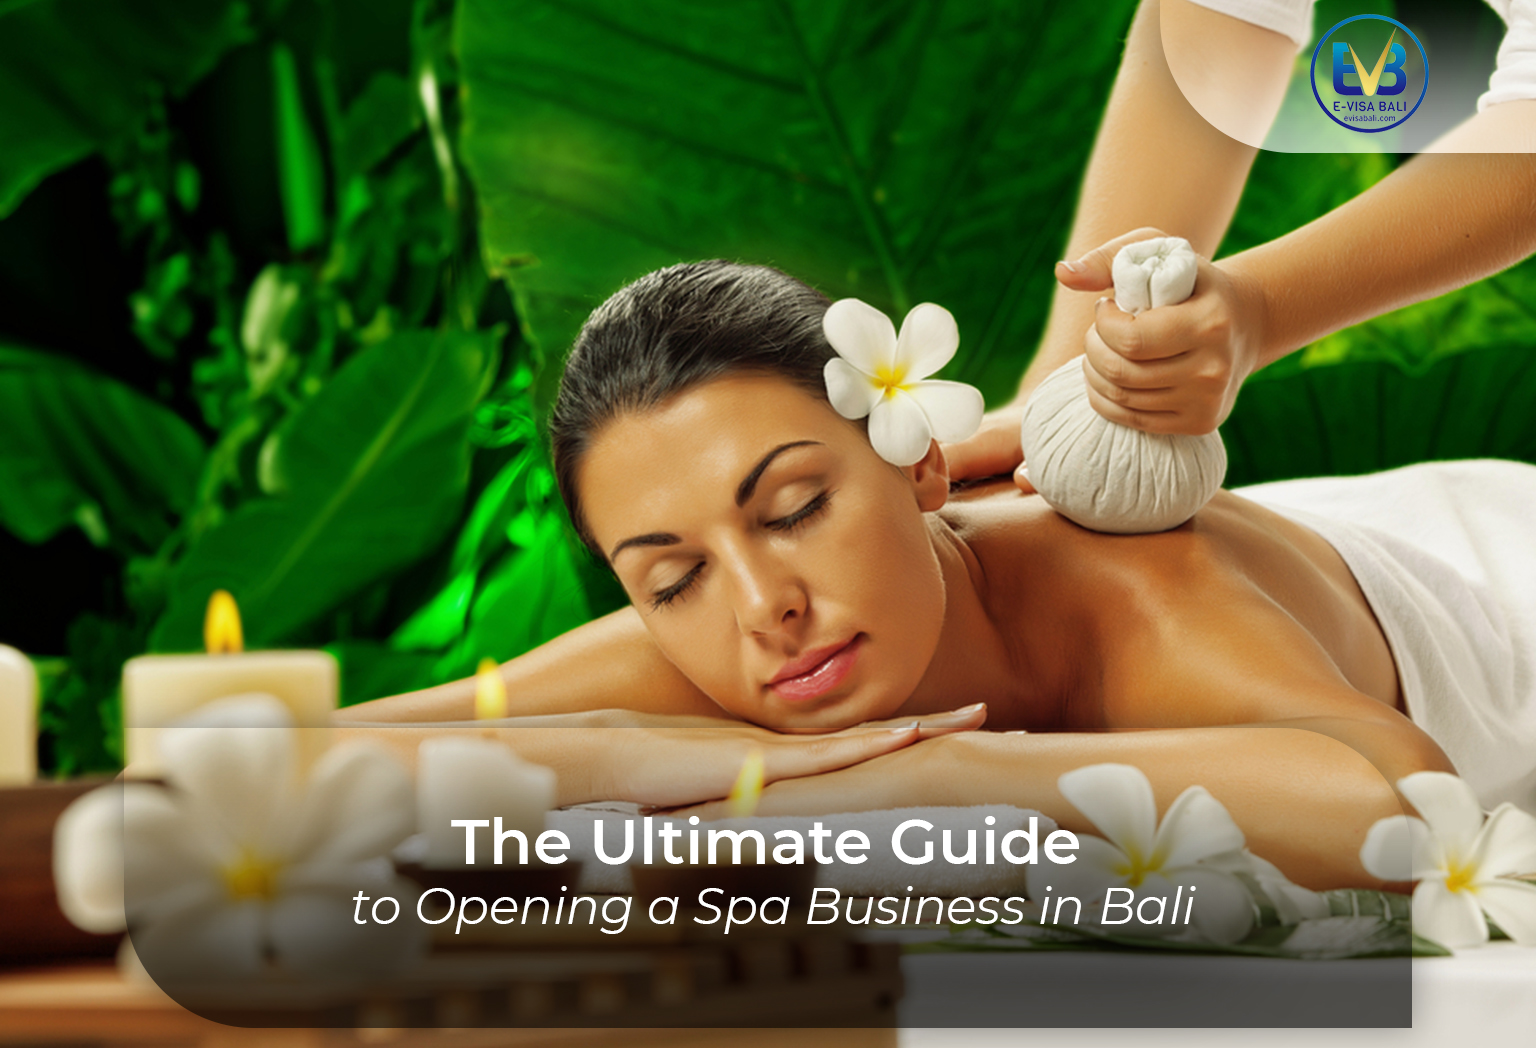 The spa business in Bali has been making a comeback in recent years. It is because Bali has been attracting tourists from all over the world who are looking for tranquility and refreshment.